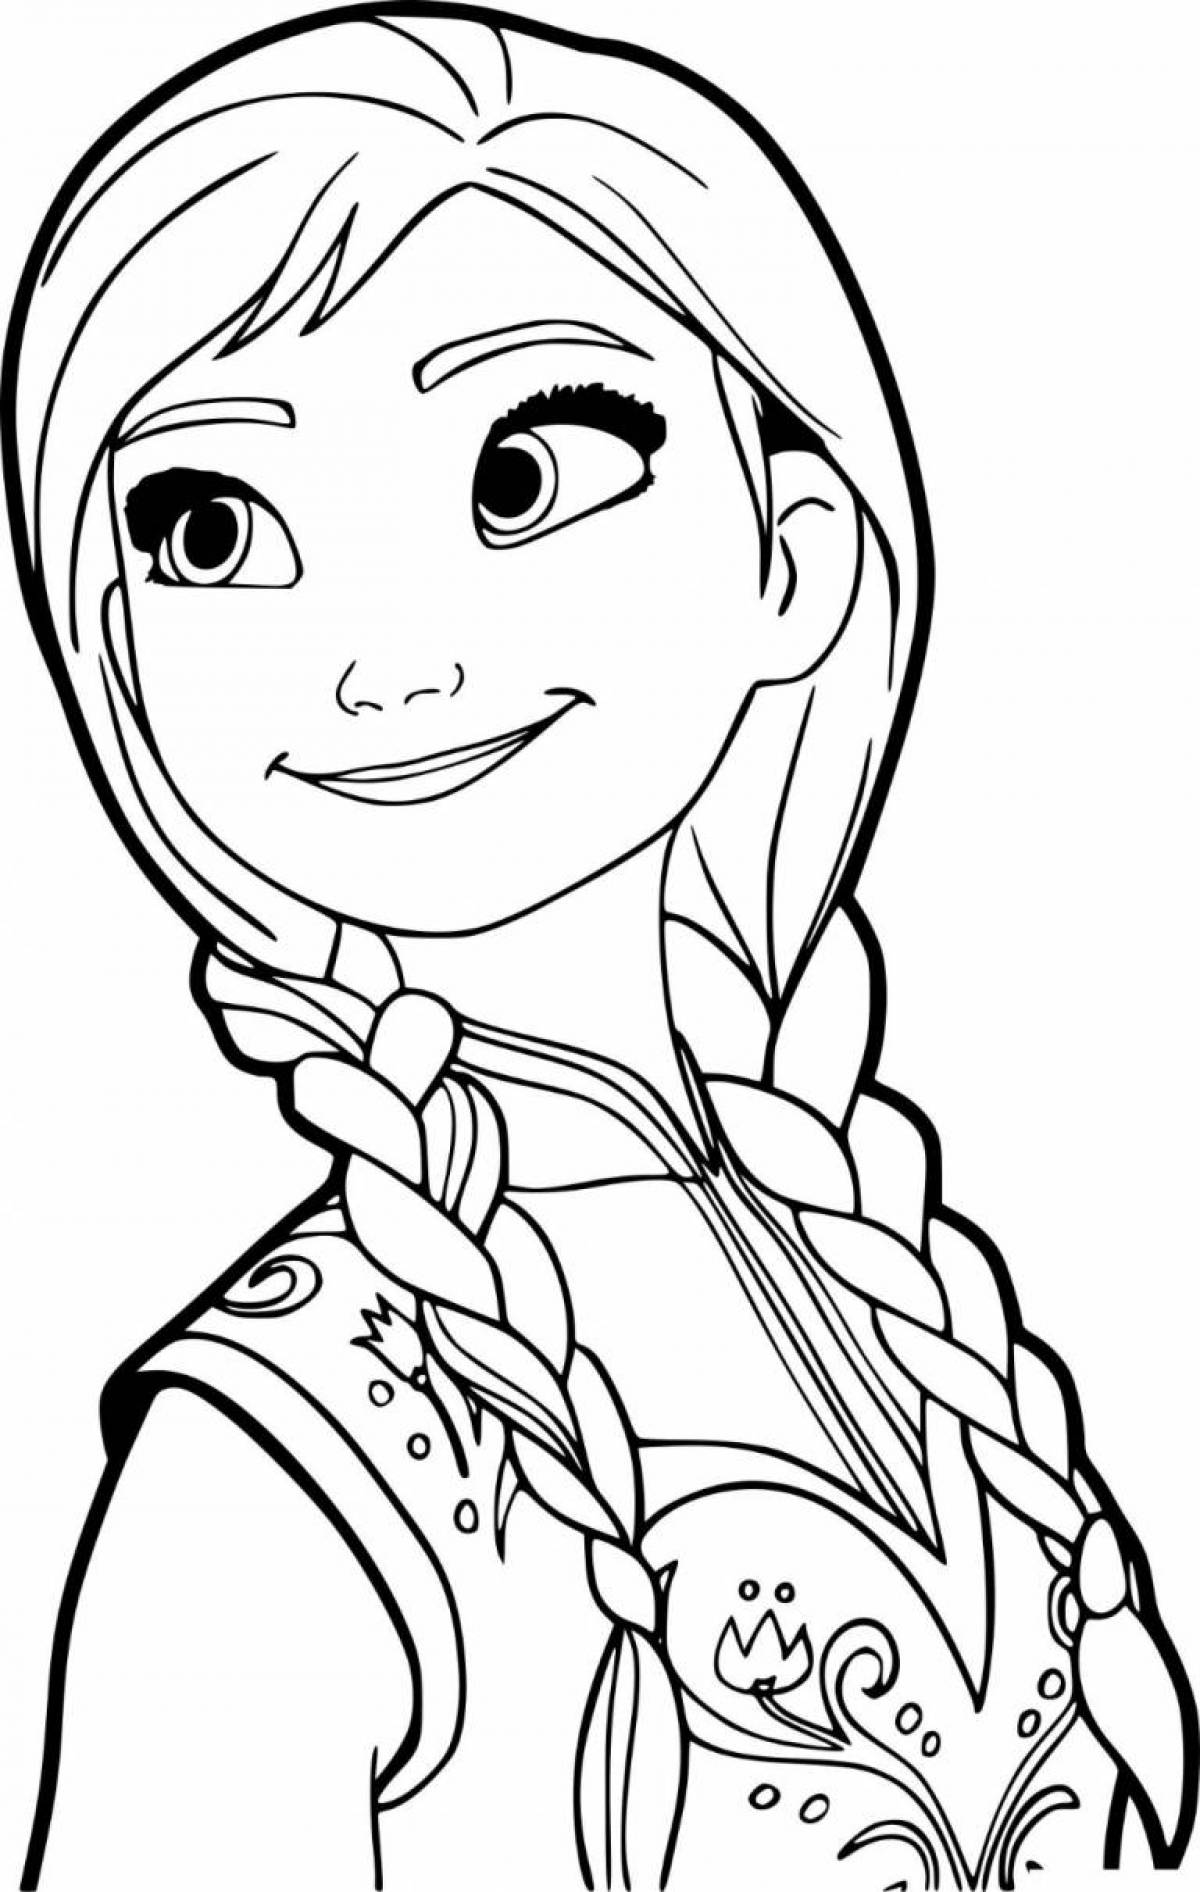 Playful cold heart coloring page for kids